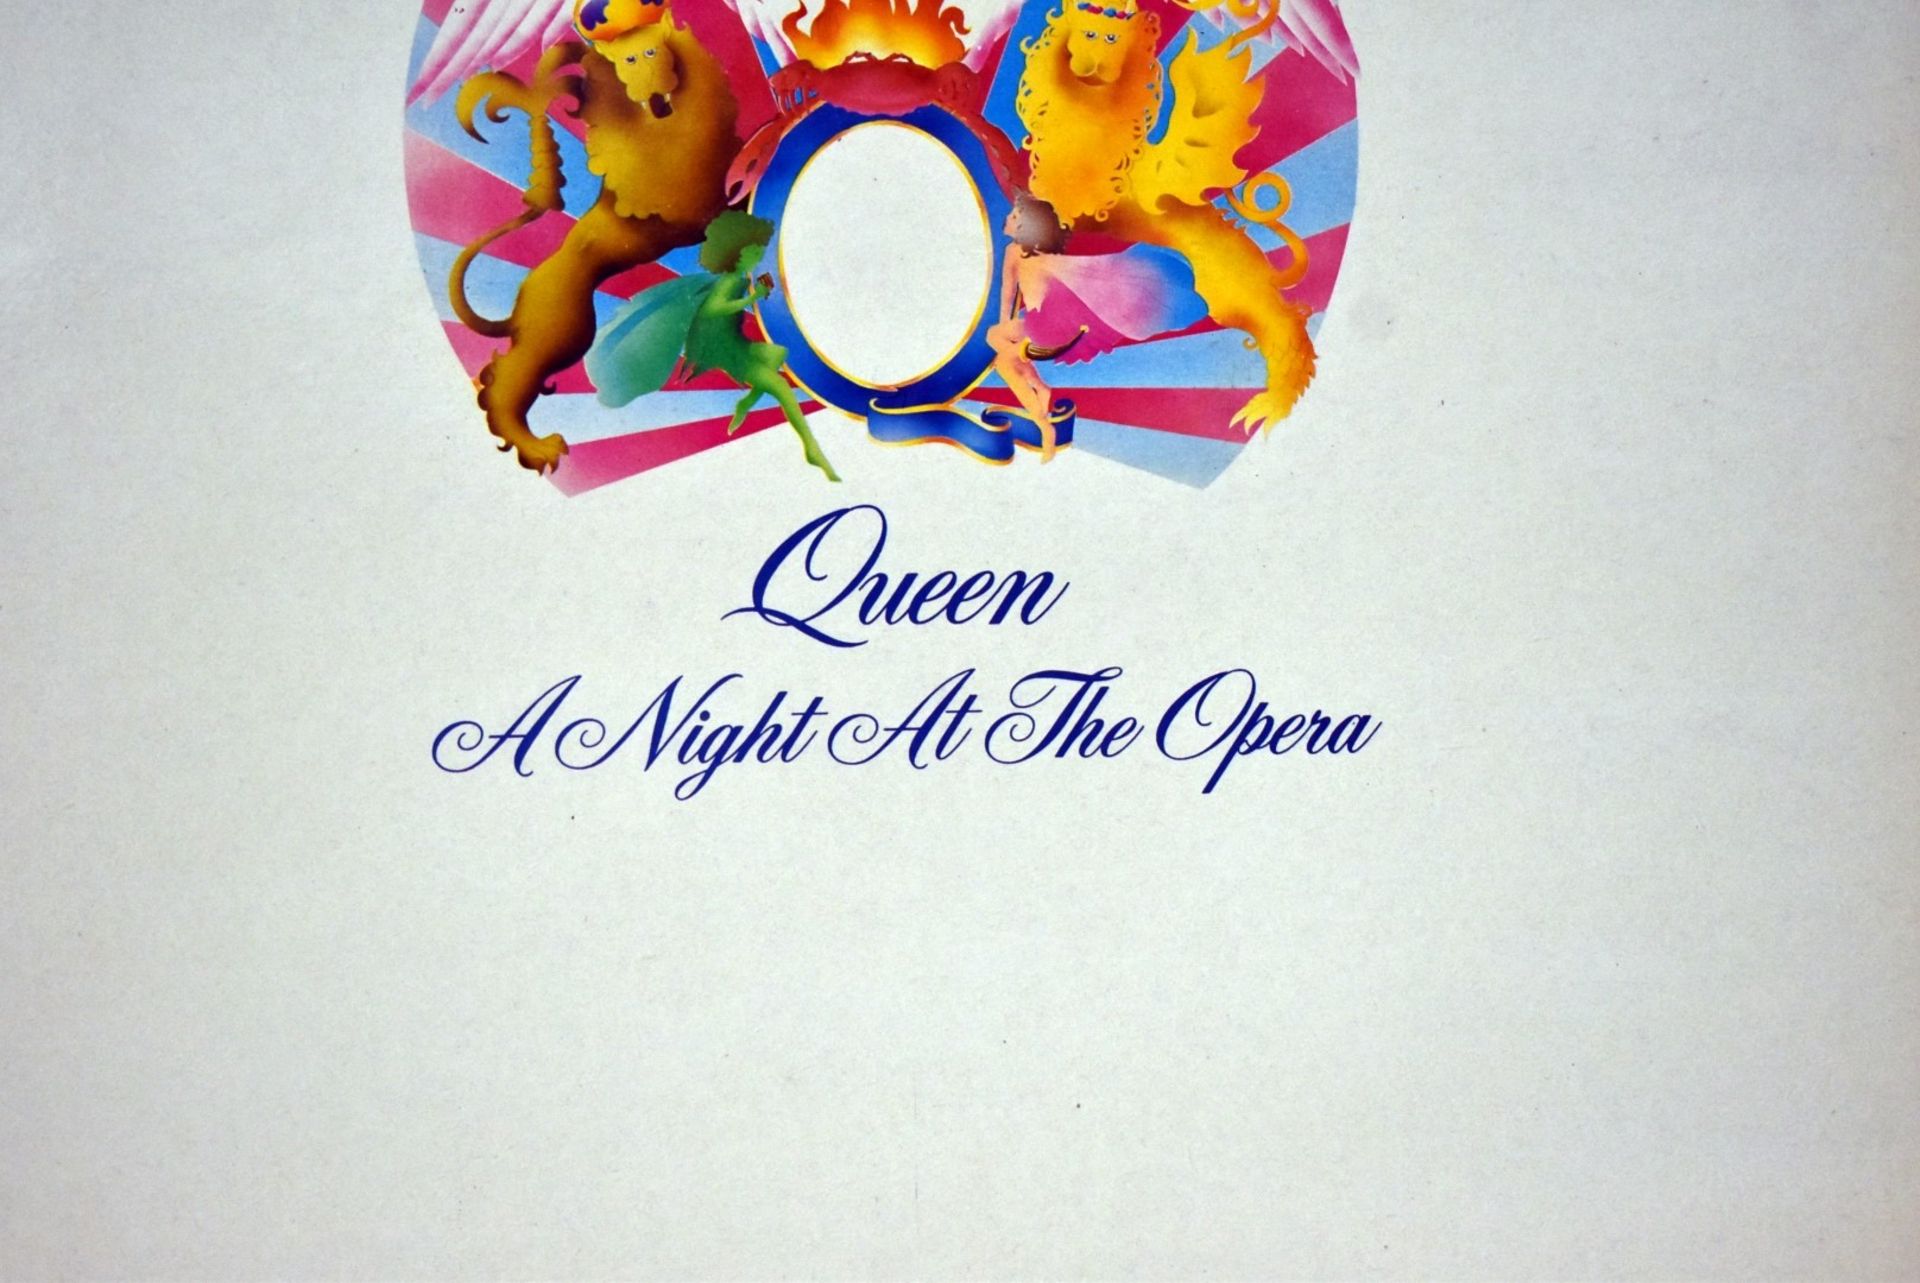 1 x QUEEN A Night At The Opera LP by EMI Records 1975 2 Sided 12 Inch Vinyl with Lyrics - Ref: - Image 5 of 21